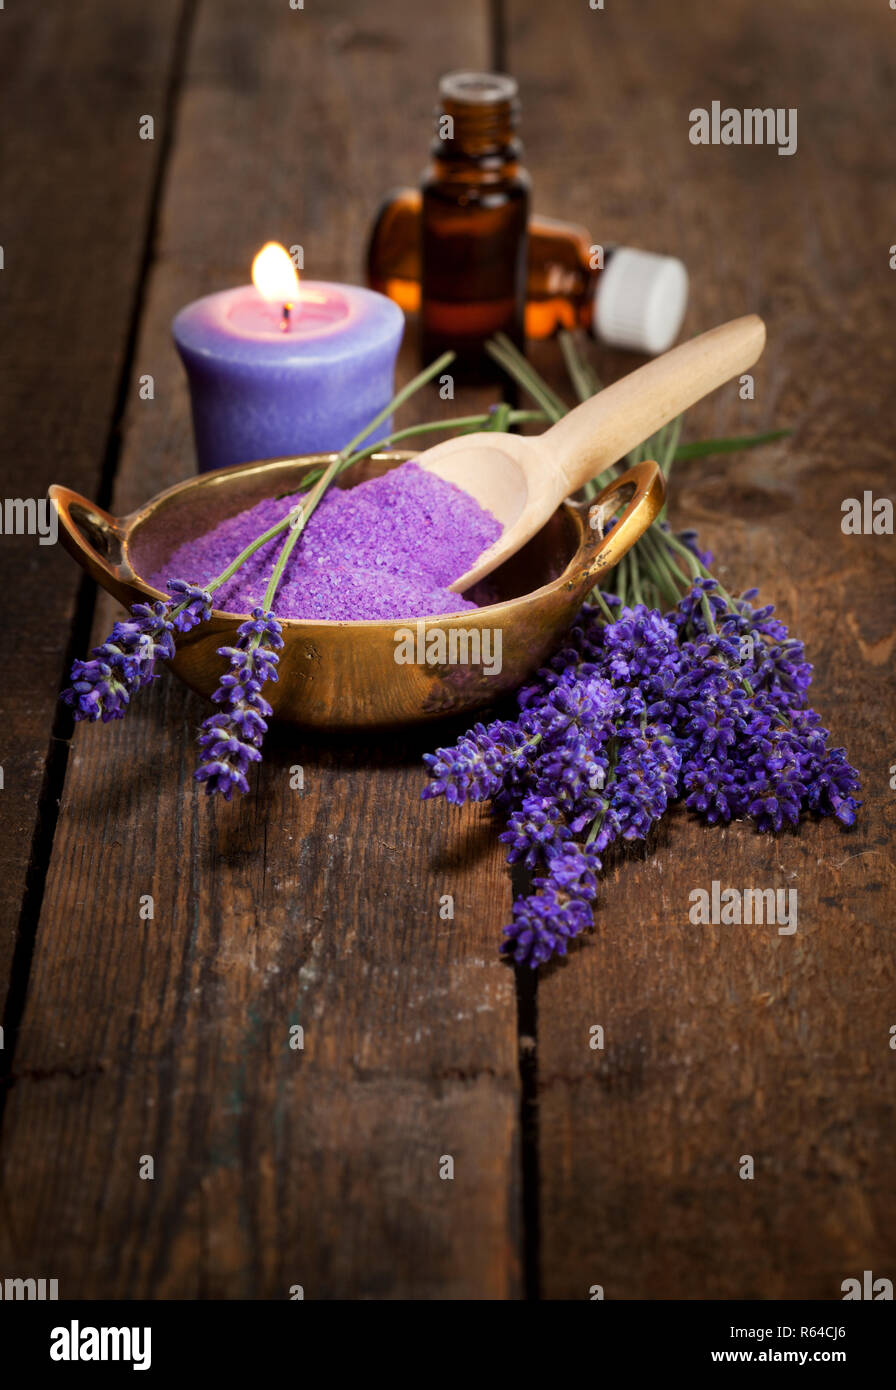 Lavnder flowers, bath salt and essential oils on wooden surface Stock Photo